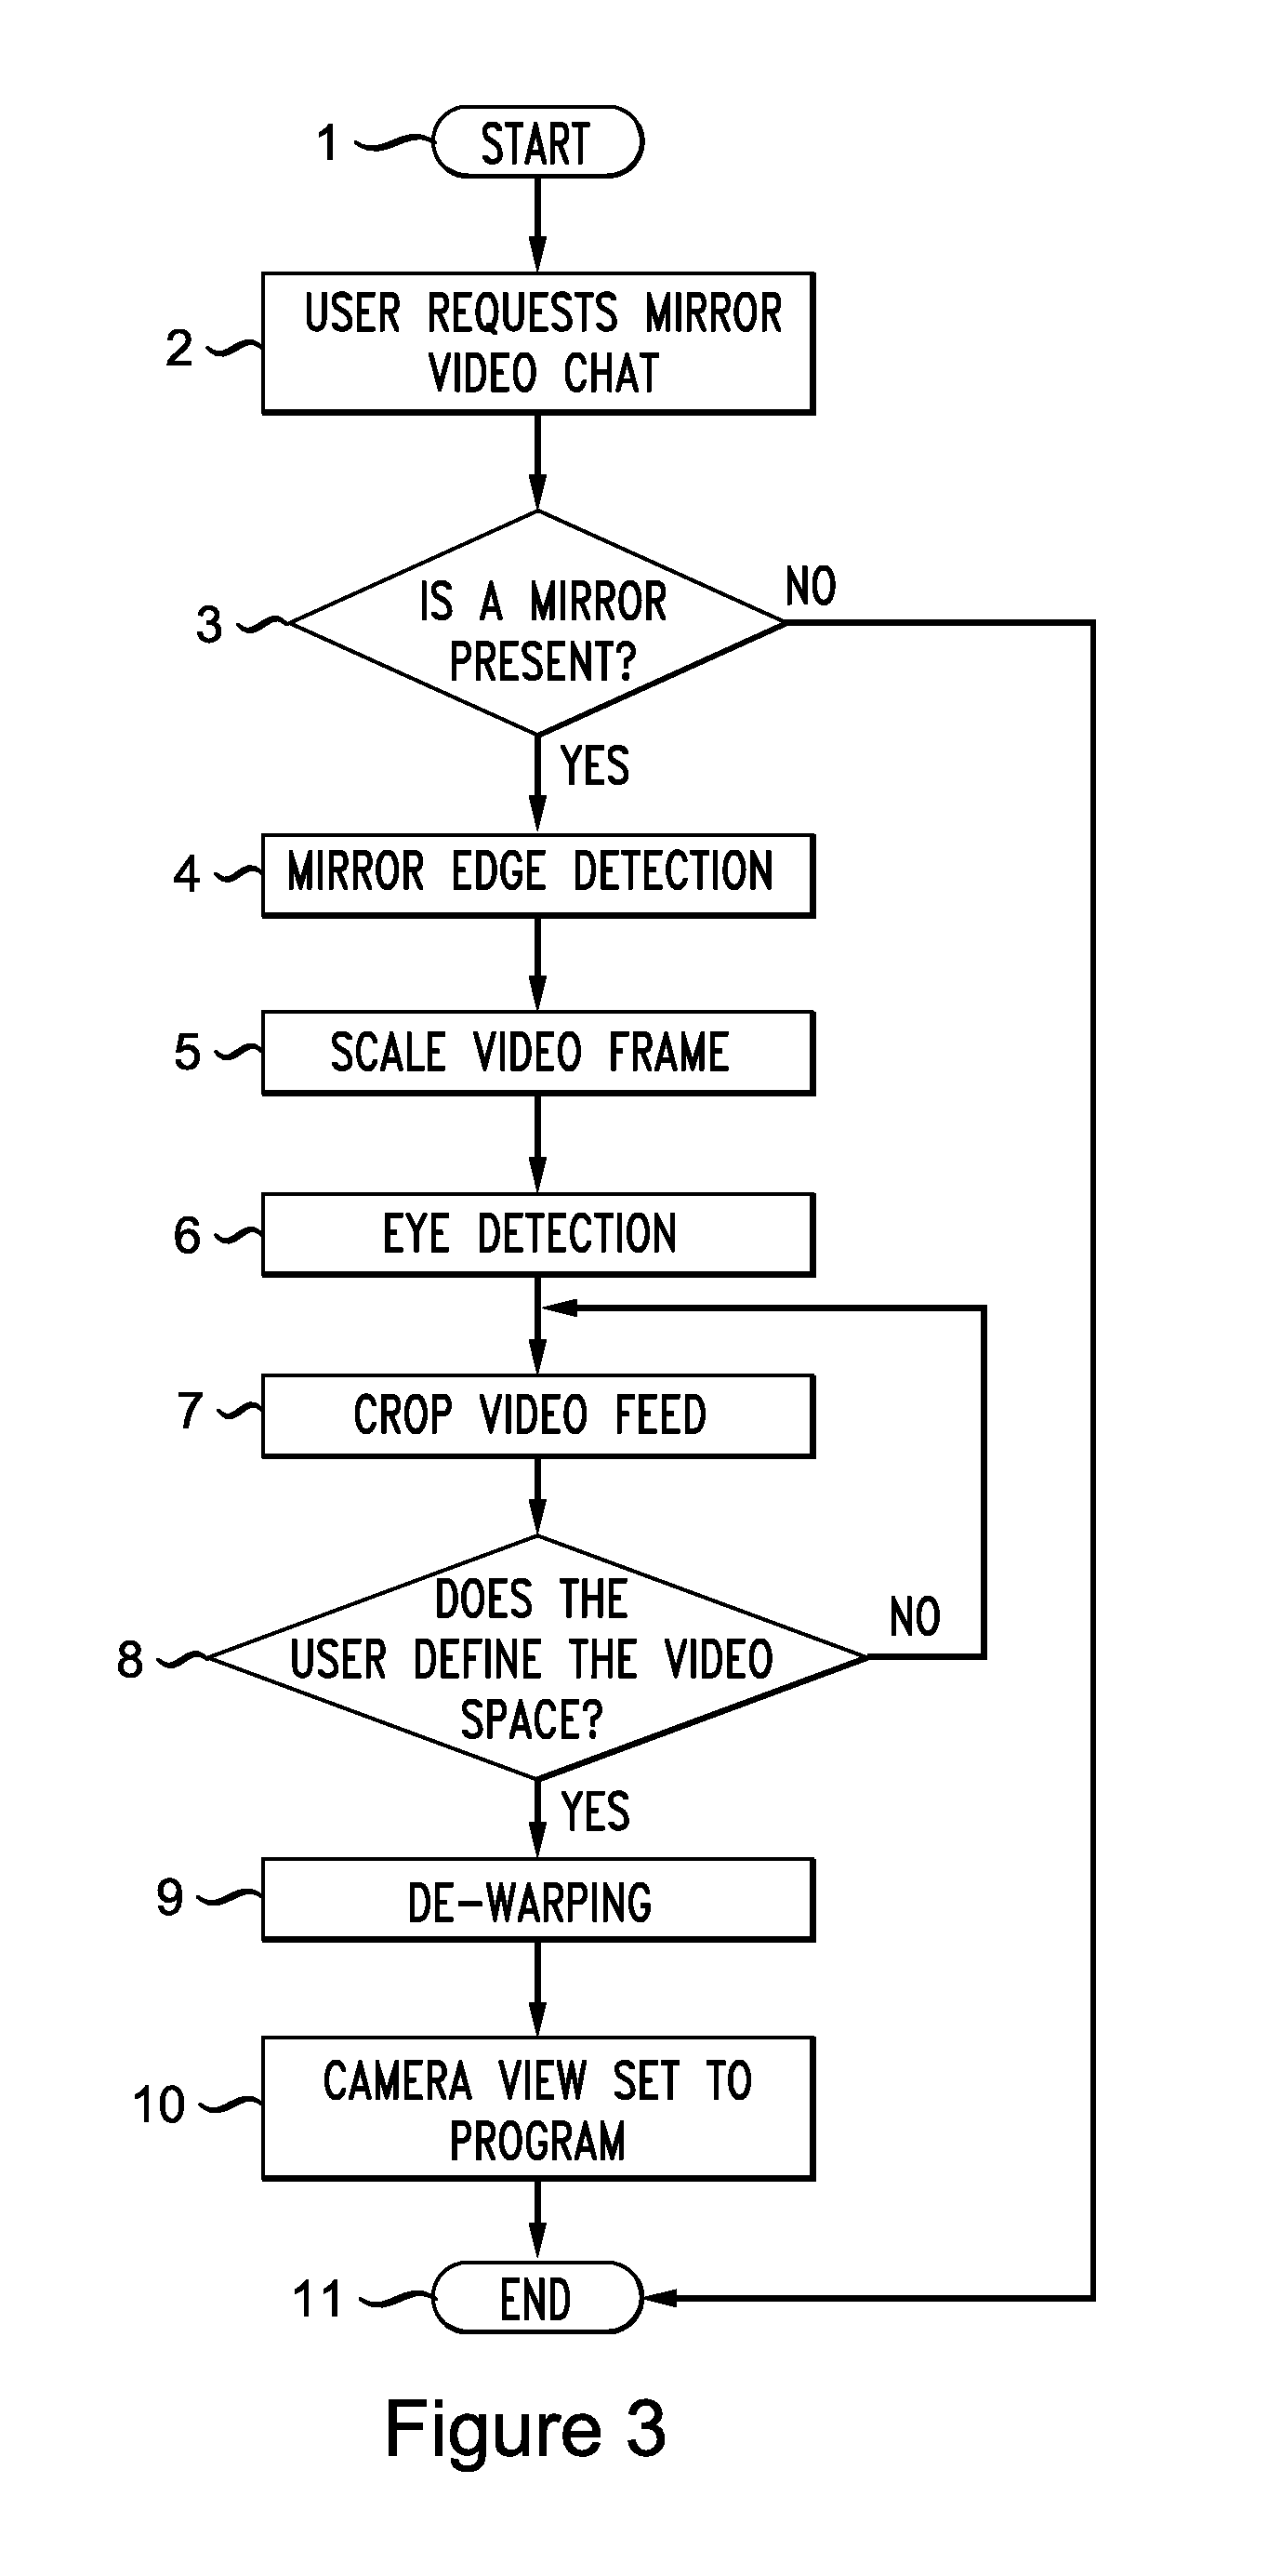 System and Method for Enabling Mirror Video Chat Using a Wearable Display Device